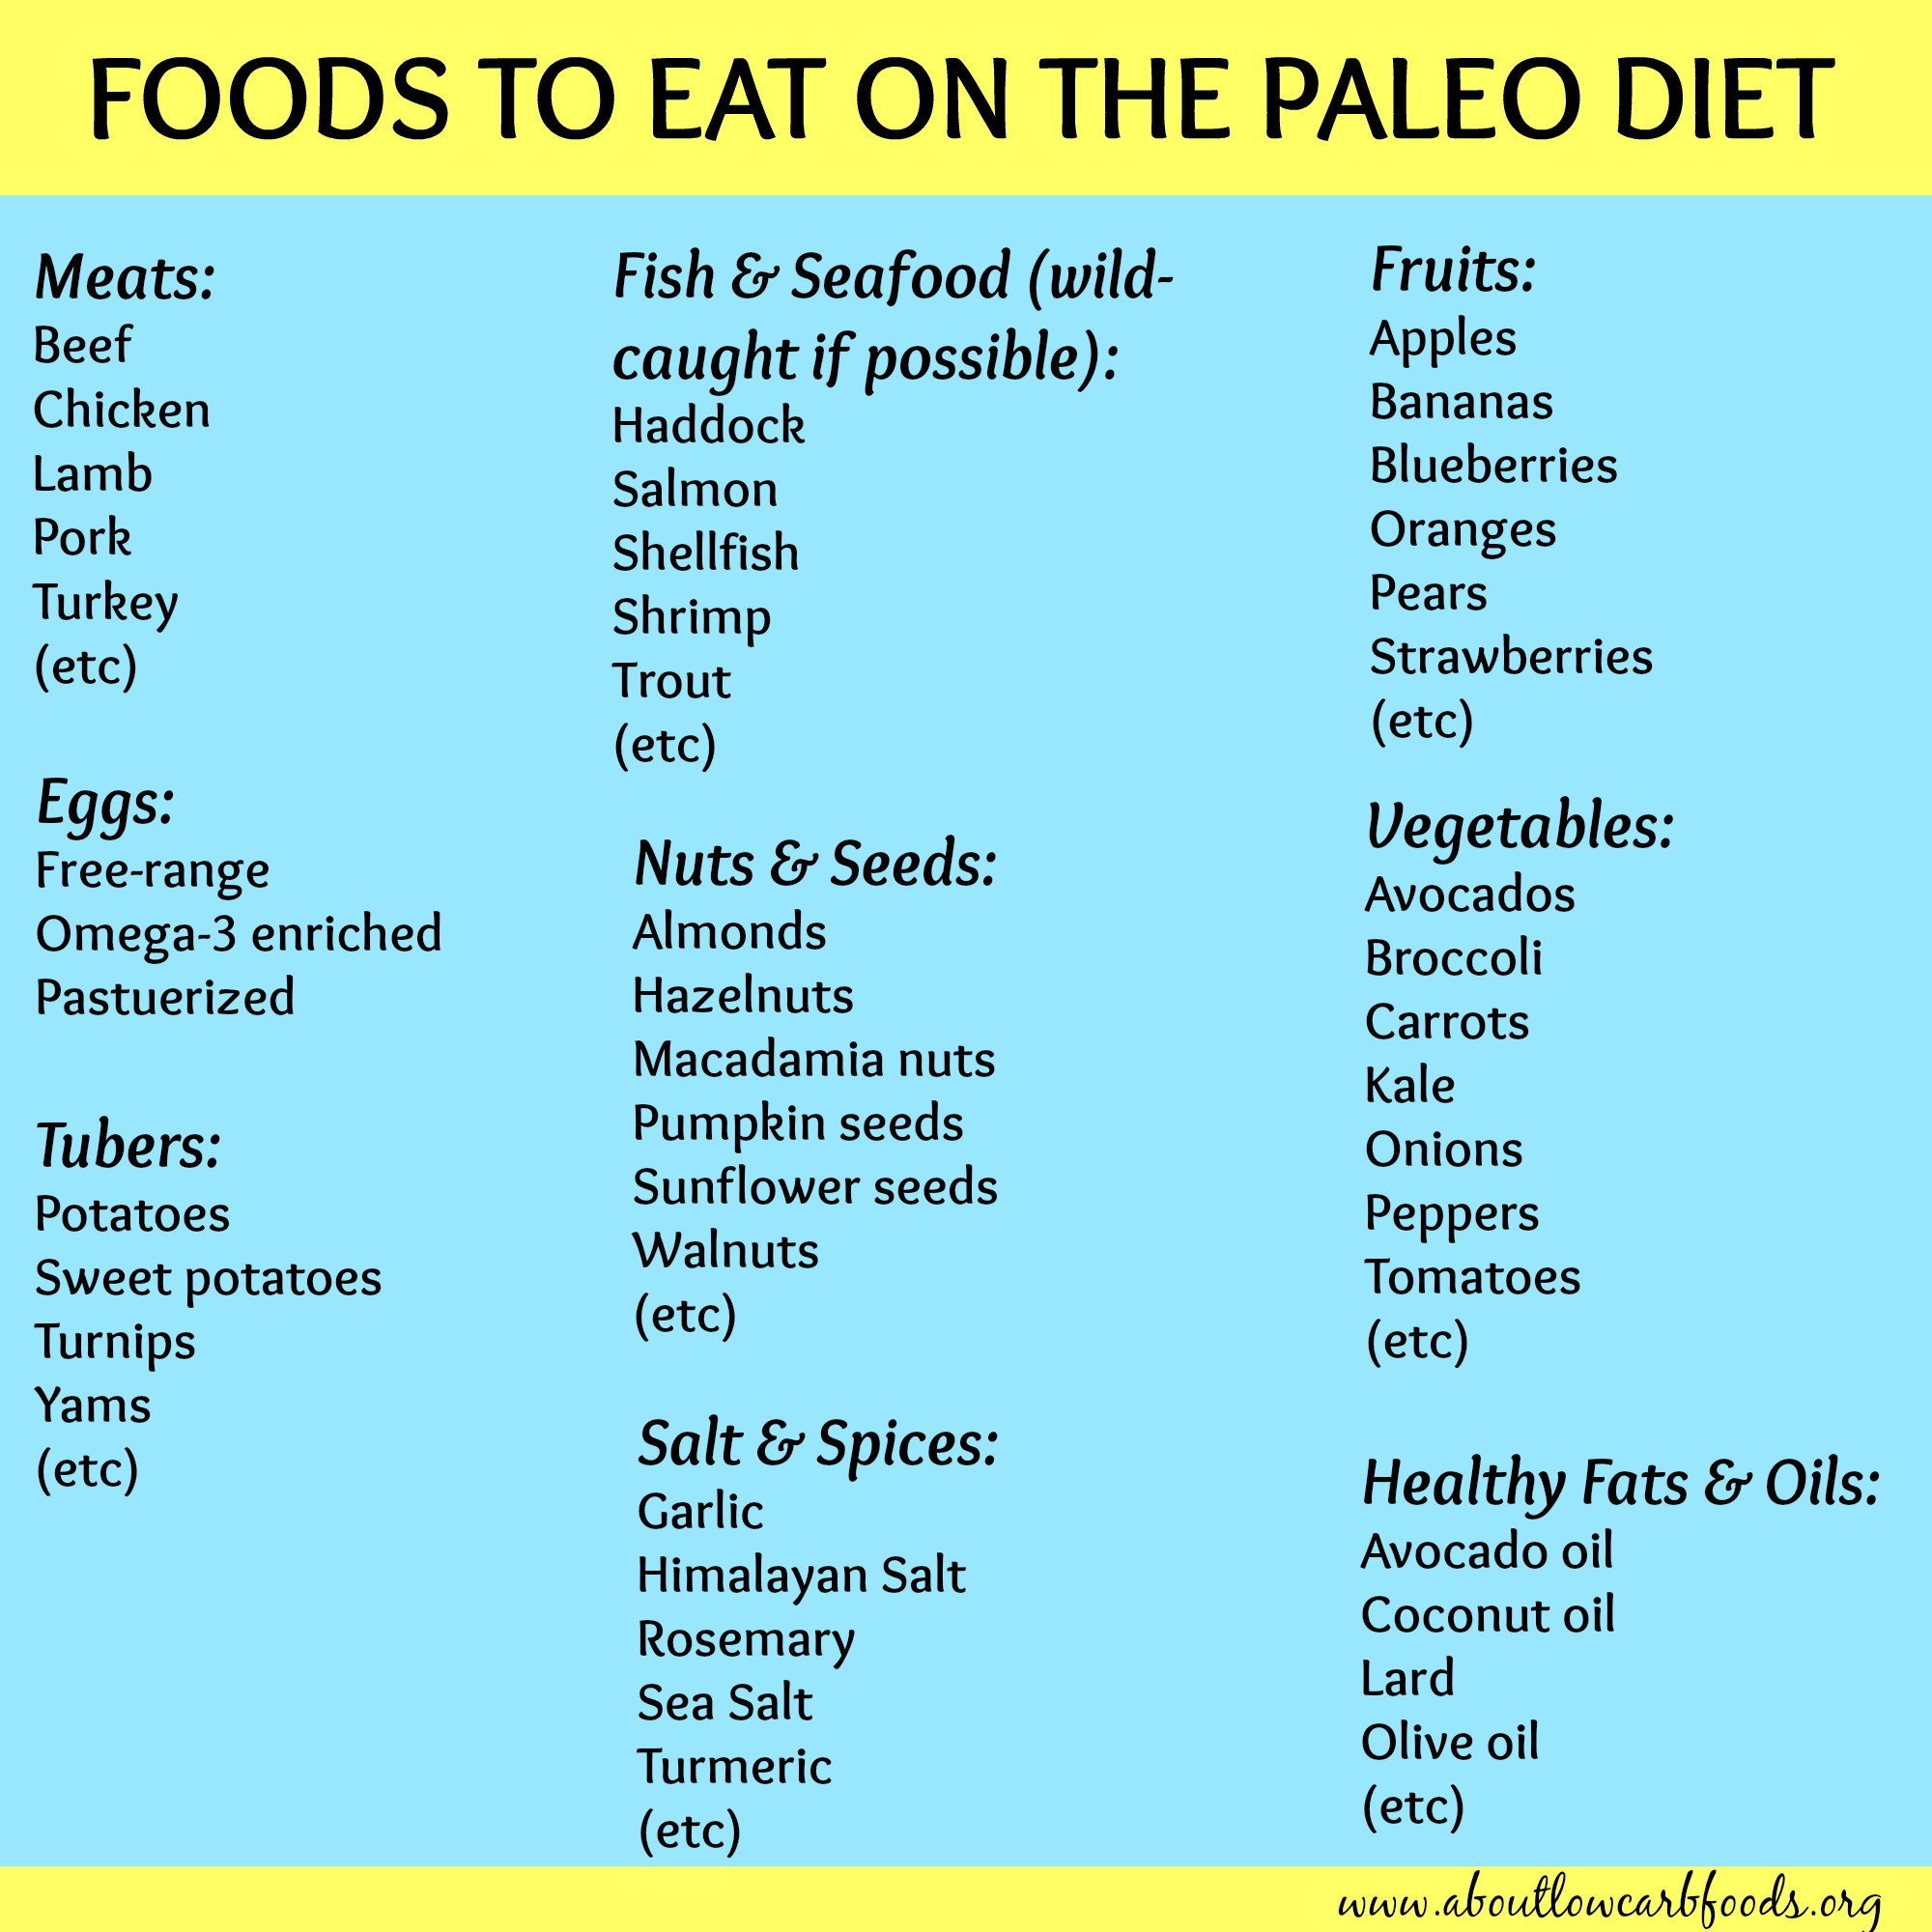 Paleo Diet To Lose Weight Fast
 Paleo Diet Meal Plan Why It’s So Popular About Low Carb